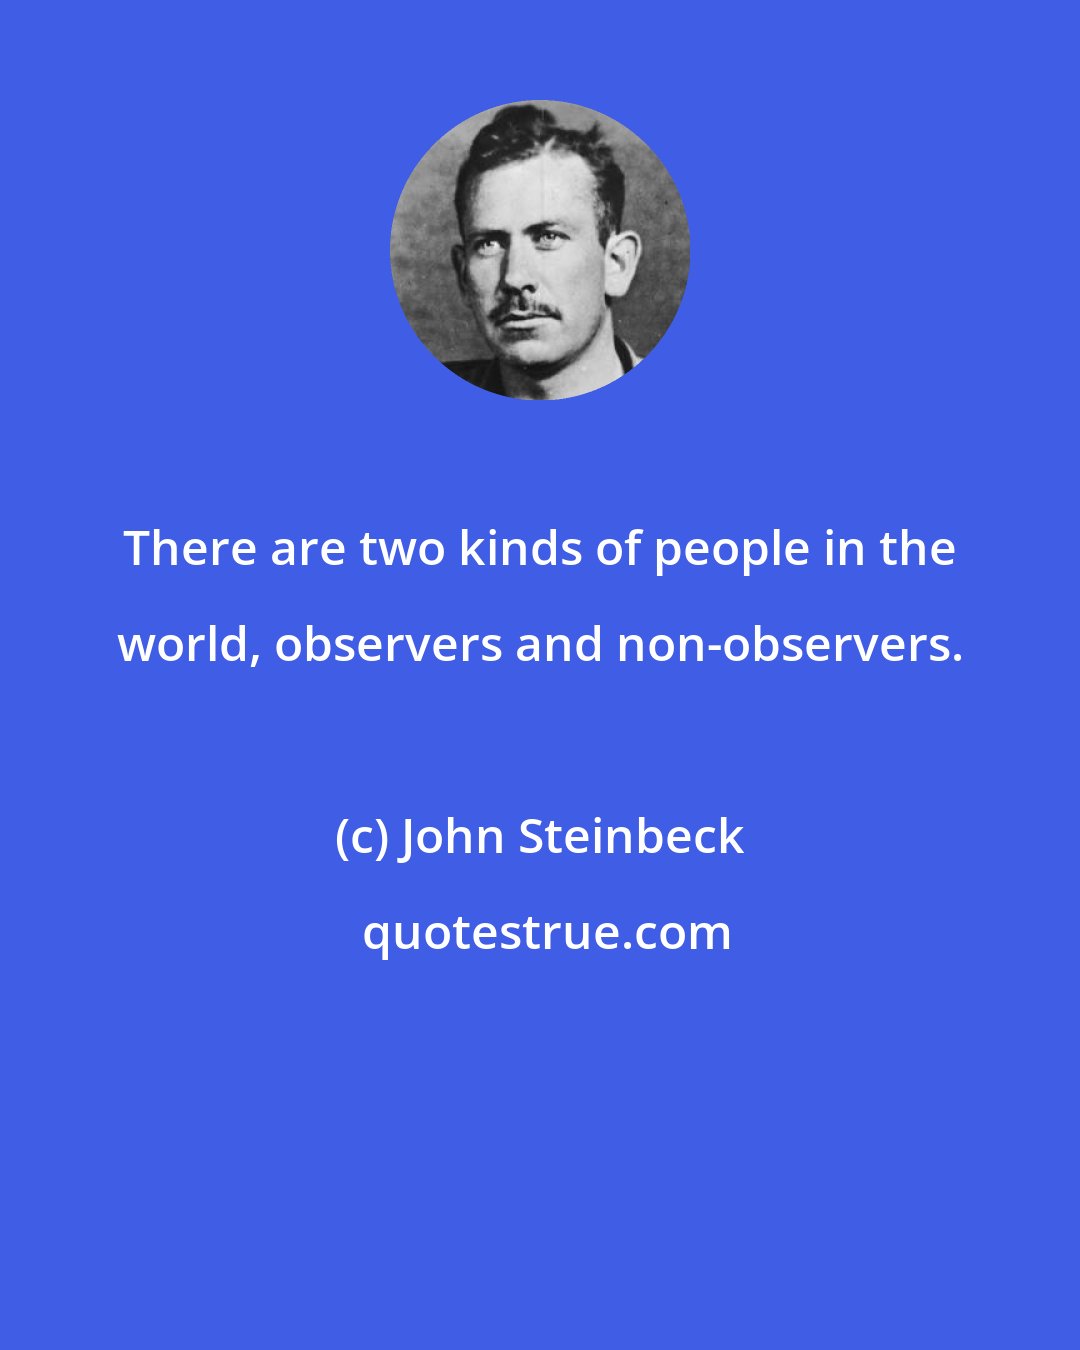 John Steinbeck: There are two kinds of people in the world, observers and non-observers.